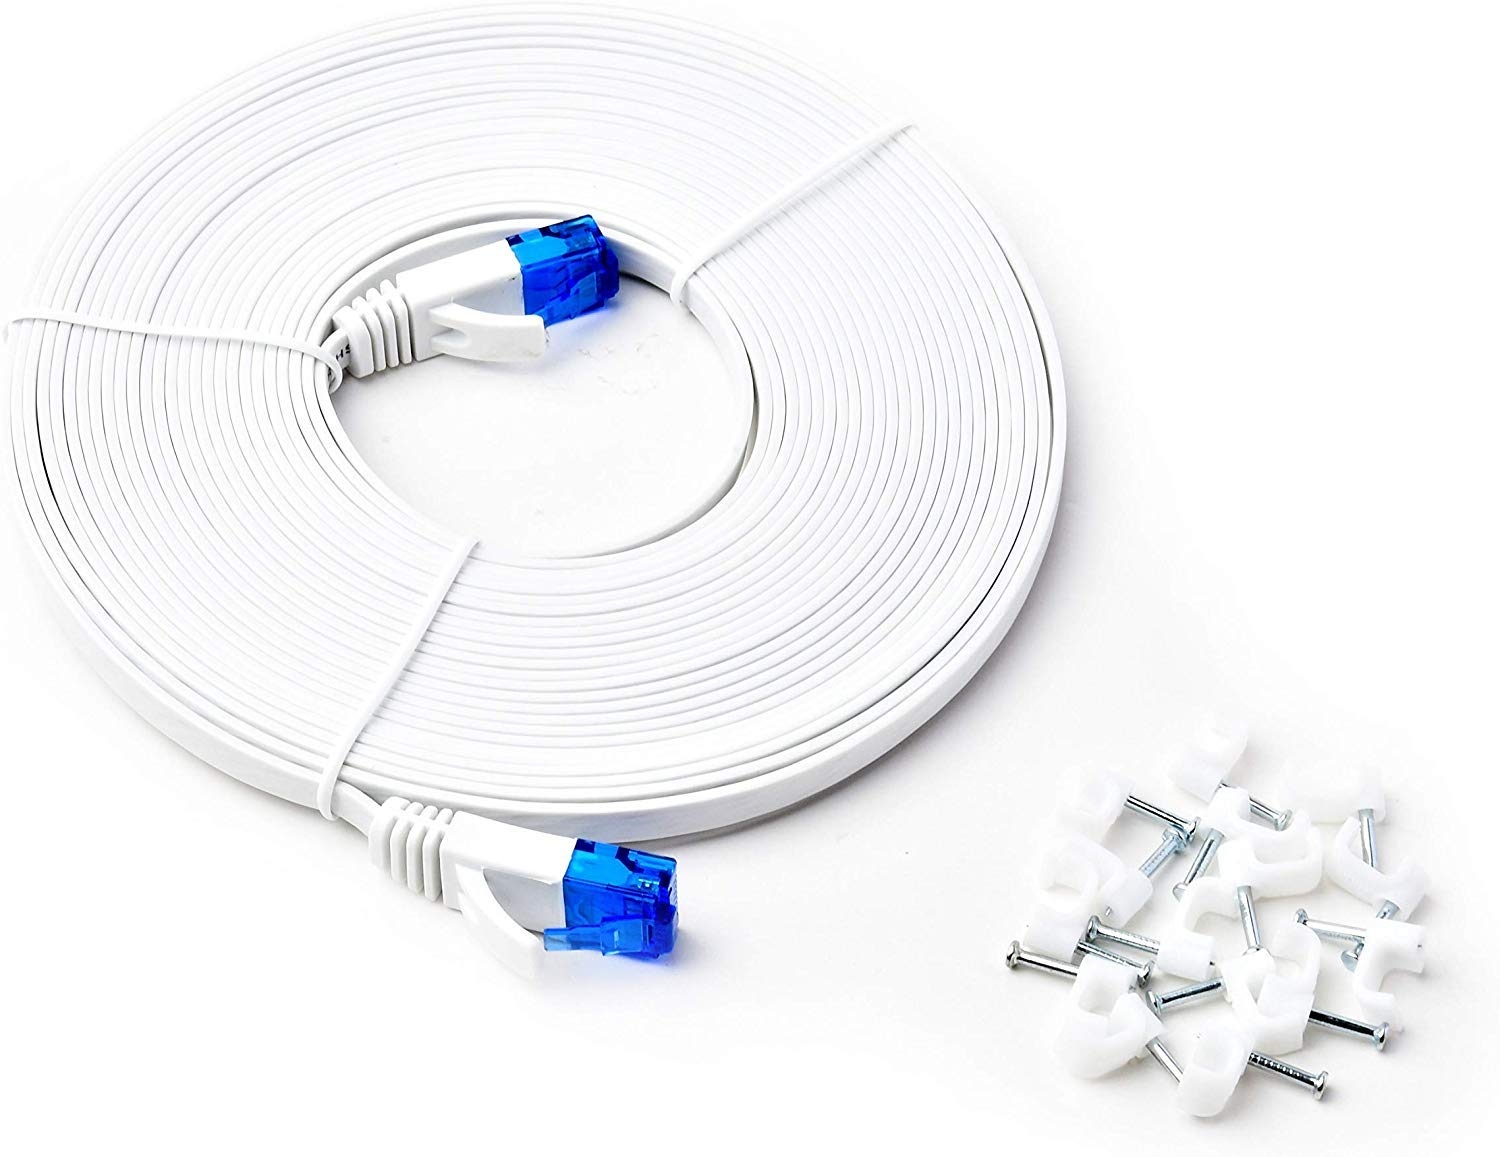 BlueRigger Cat 6 Ethernet Cable | Flat Internet Network LAN Patch Cords | Computer Wire/Cable. (50 Feet/15 Meters)